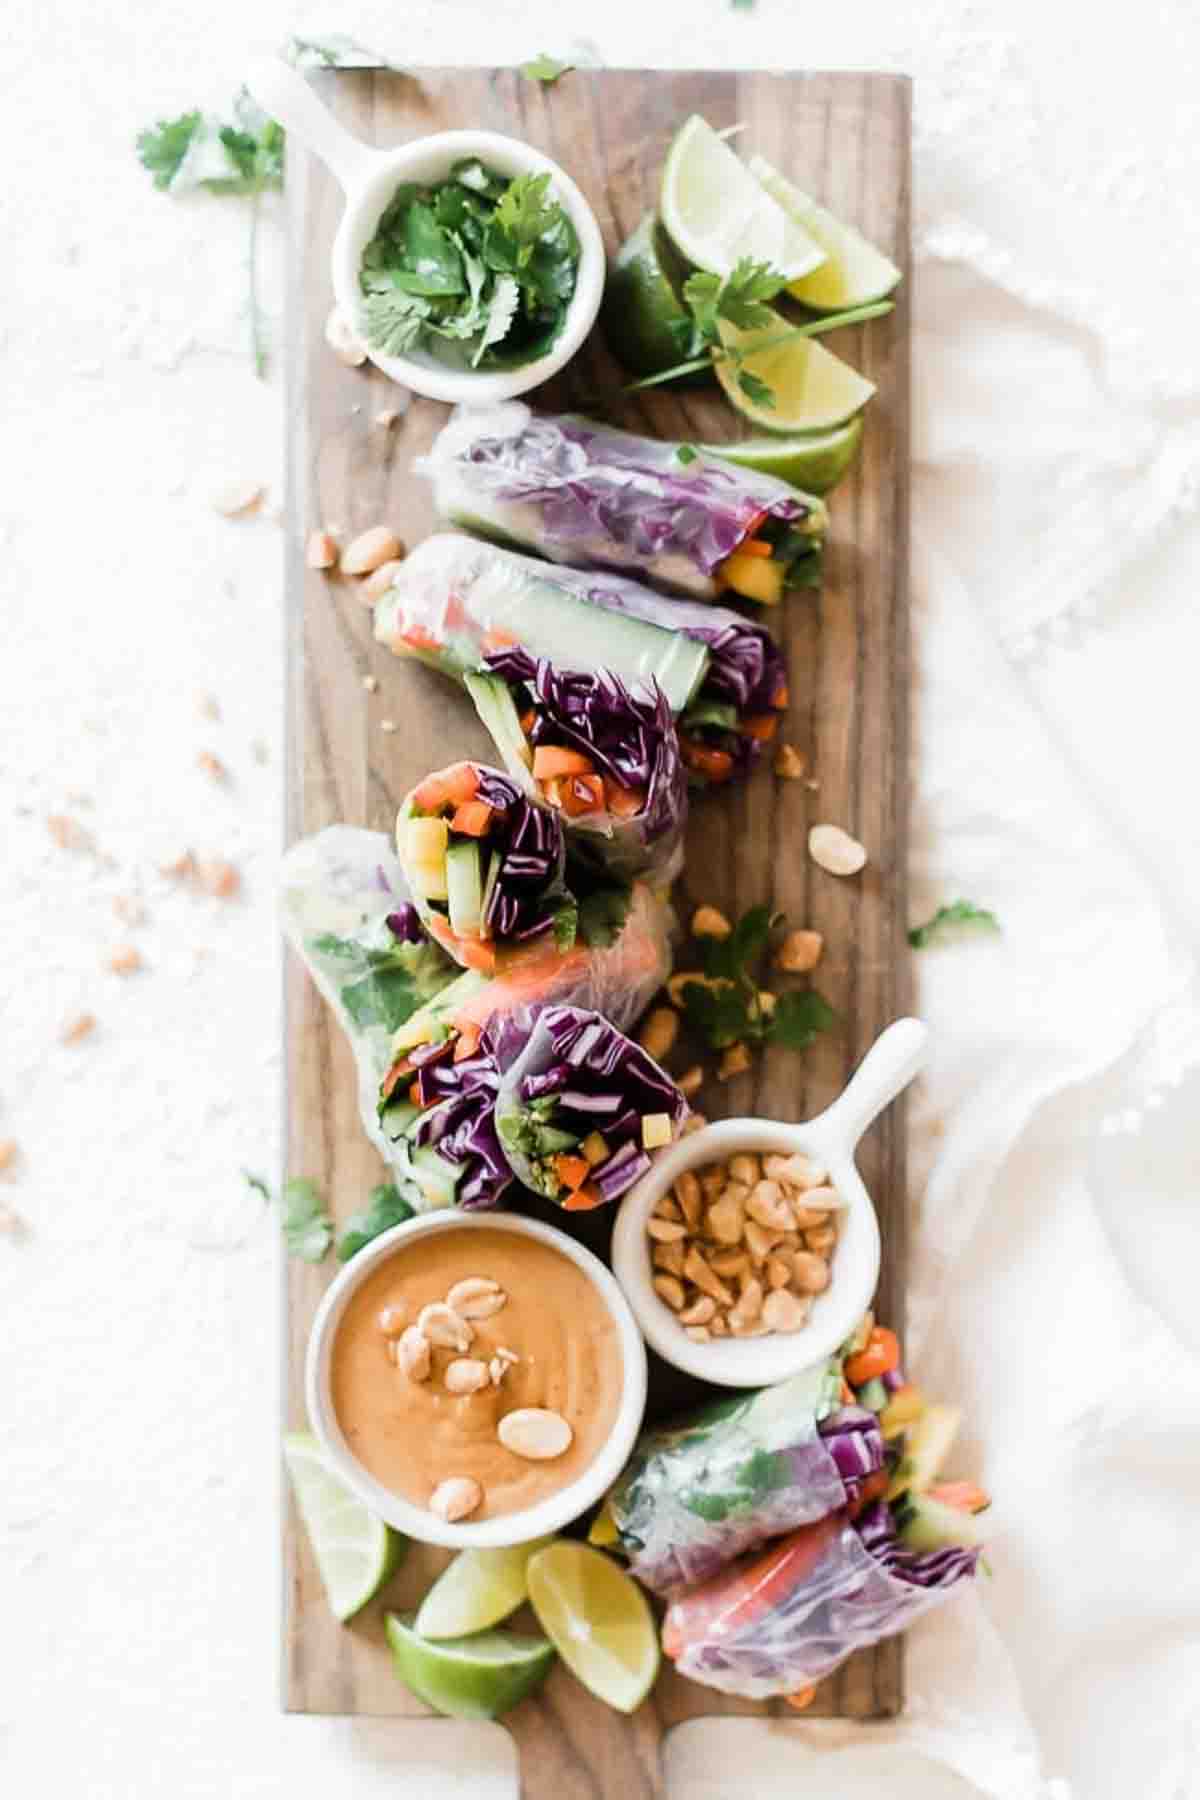 Easy spring roll recipe arranged on a wooden cutting board. Peanut dipping sauce and peanuts to the side.